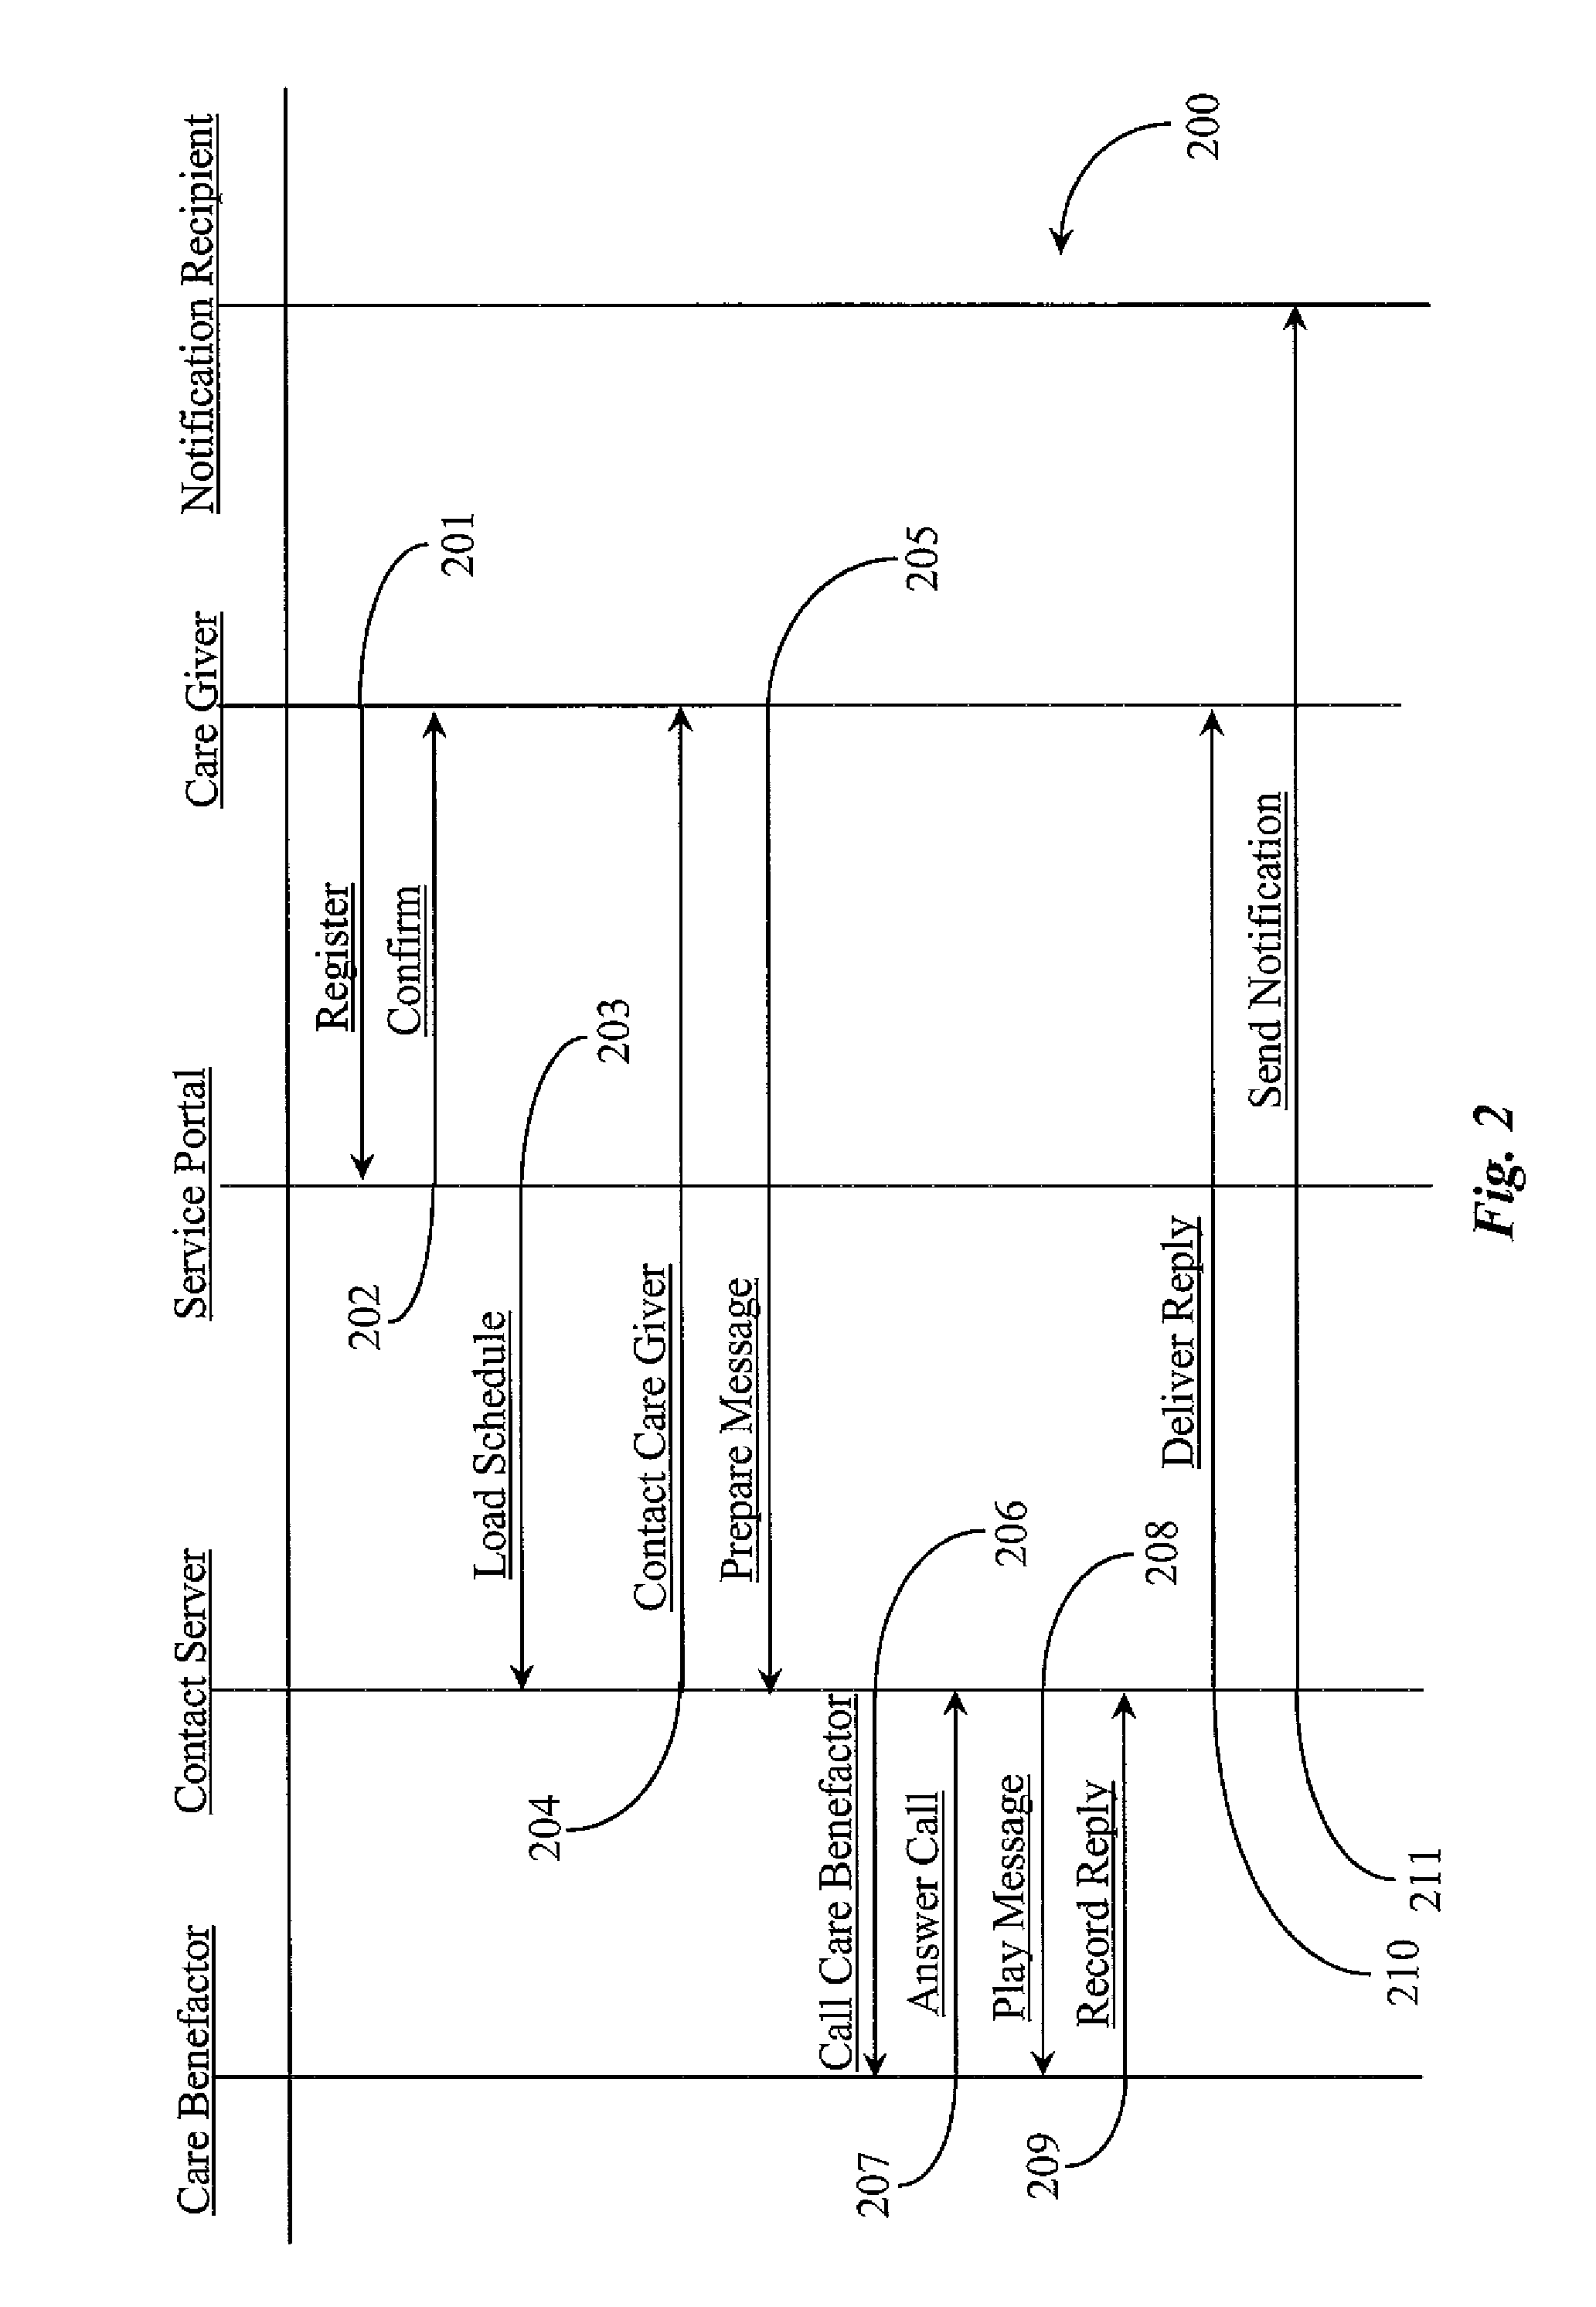 Telecommunications System for Monitoring and for Enabling a Communication Chain between Care Givers and Benefactors and for Providing Alert Notification to Designated Recipients